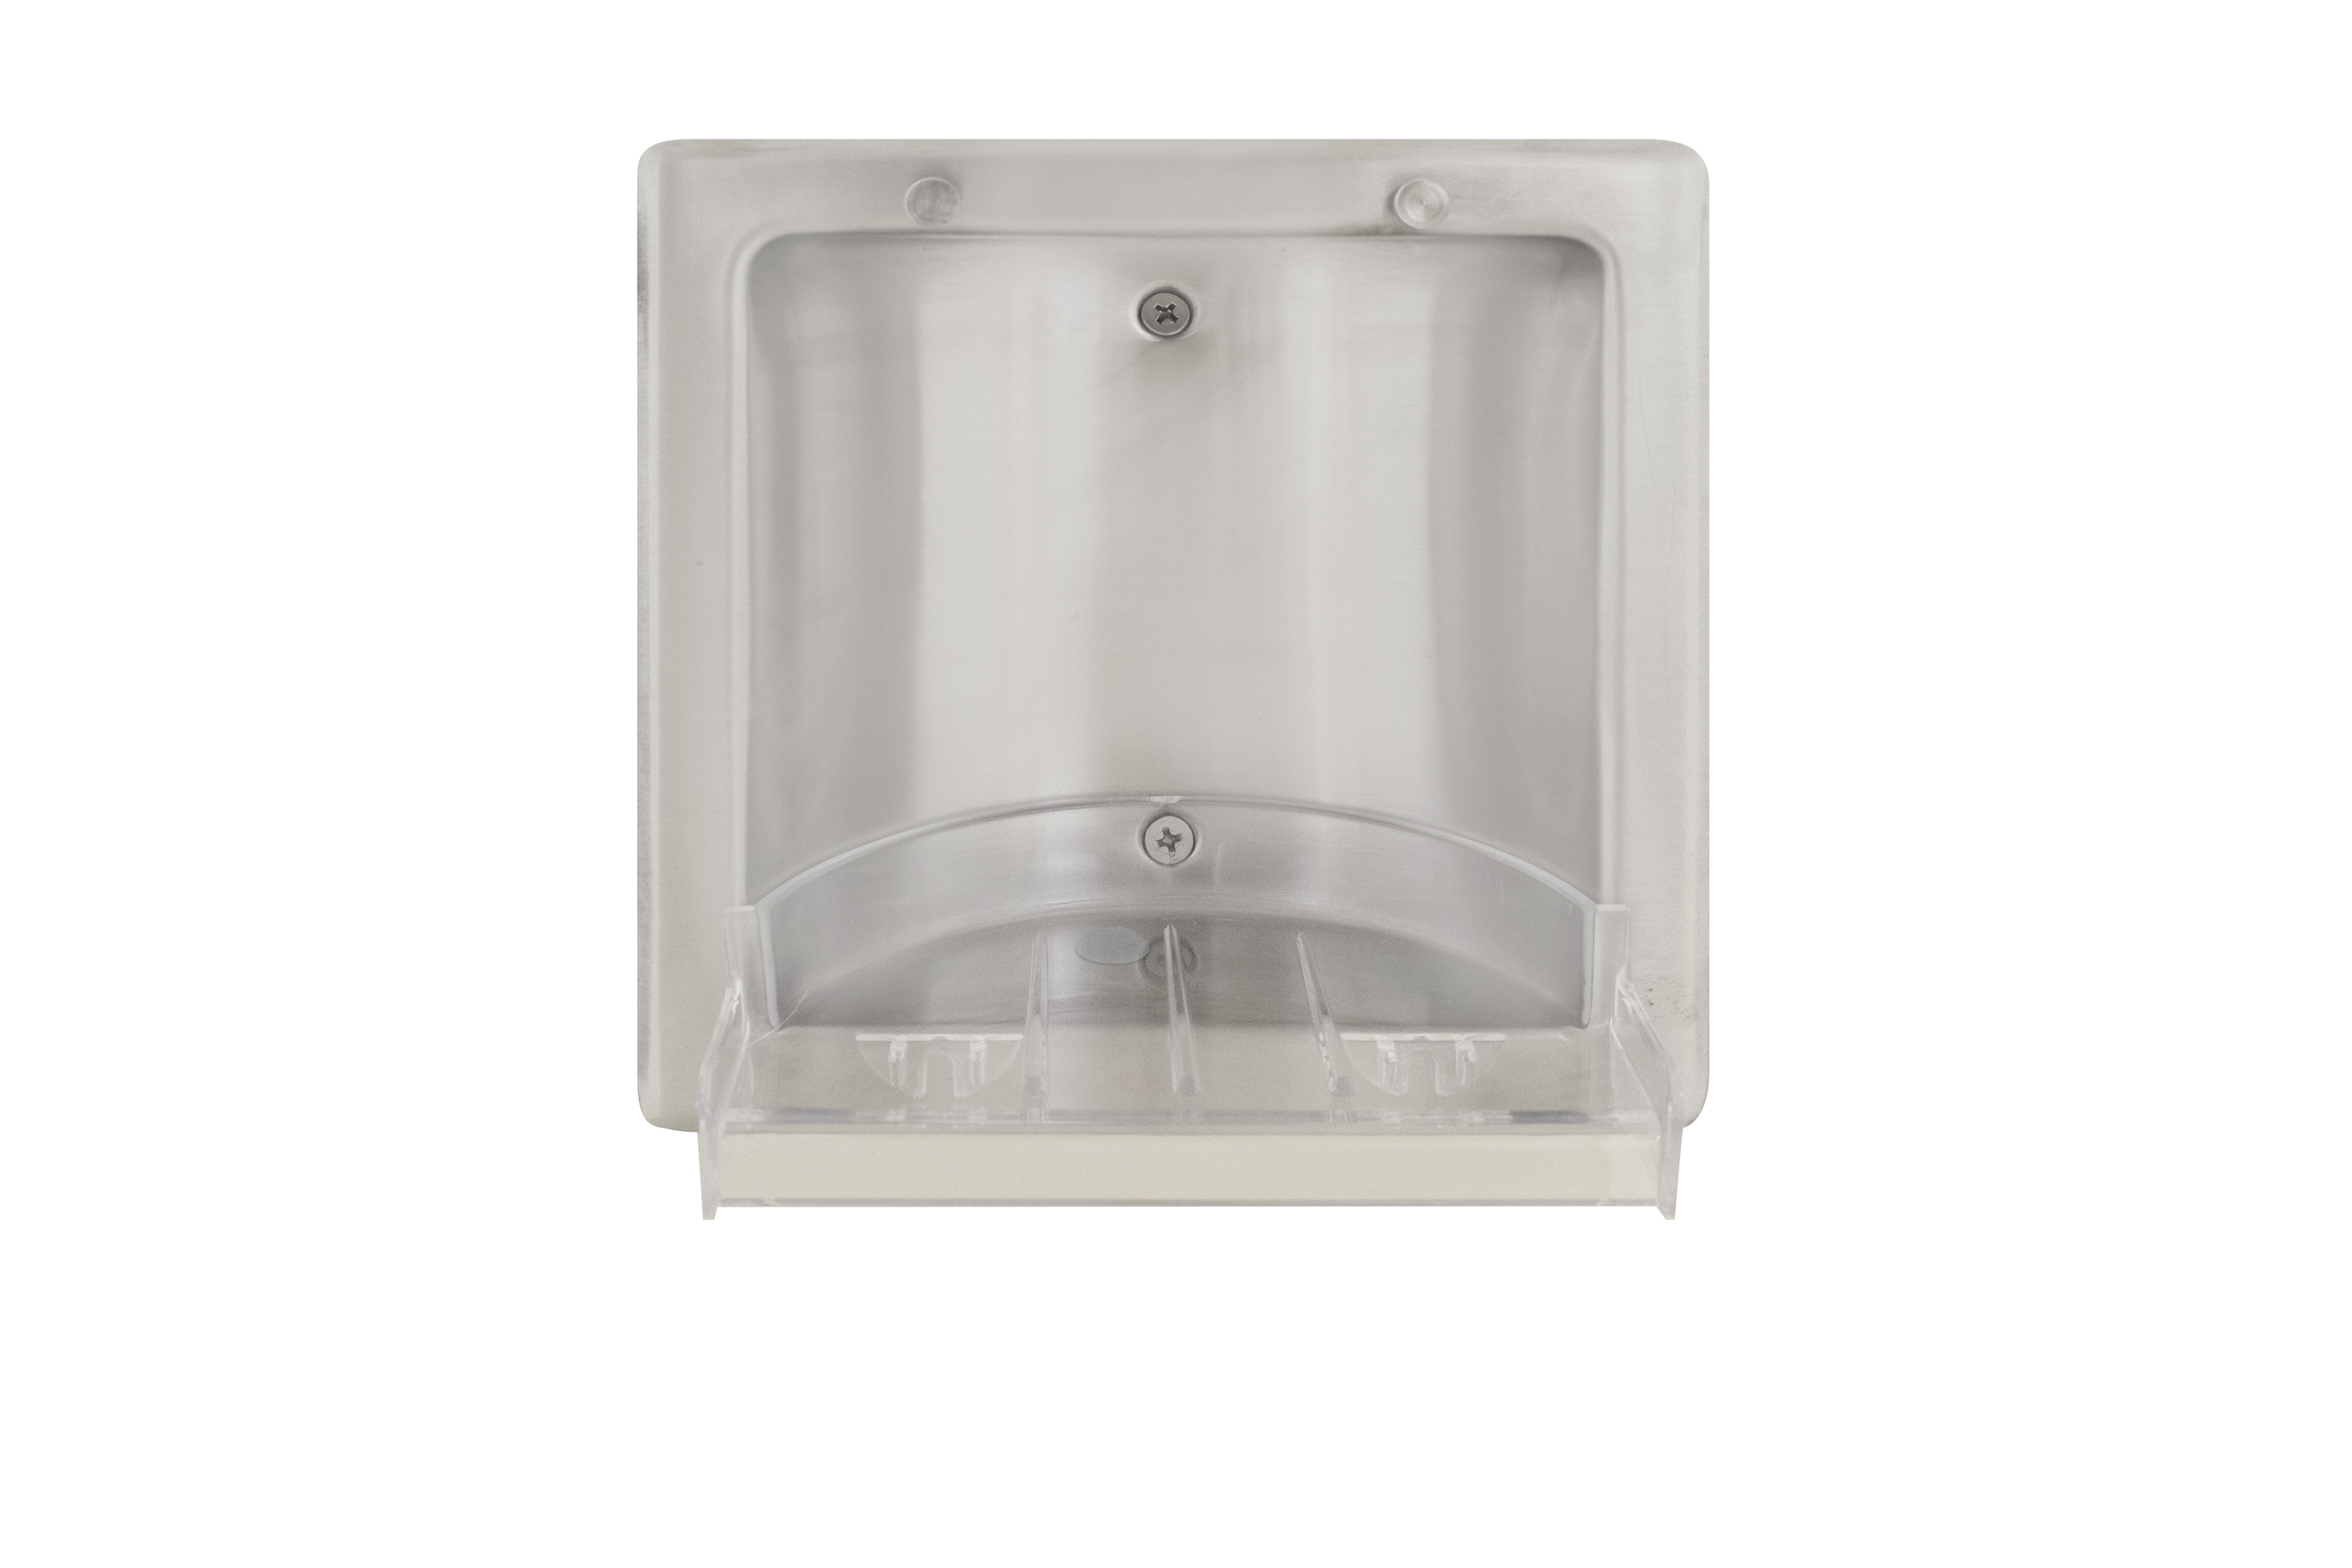 Recessed Stainless Steel Soap Dish - Model 9353